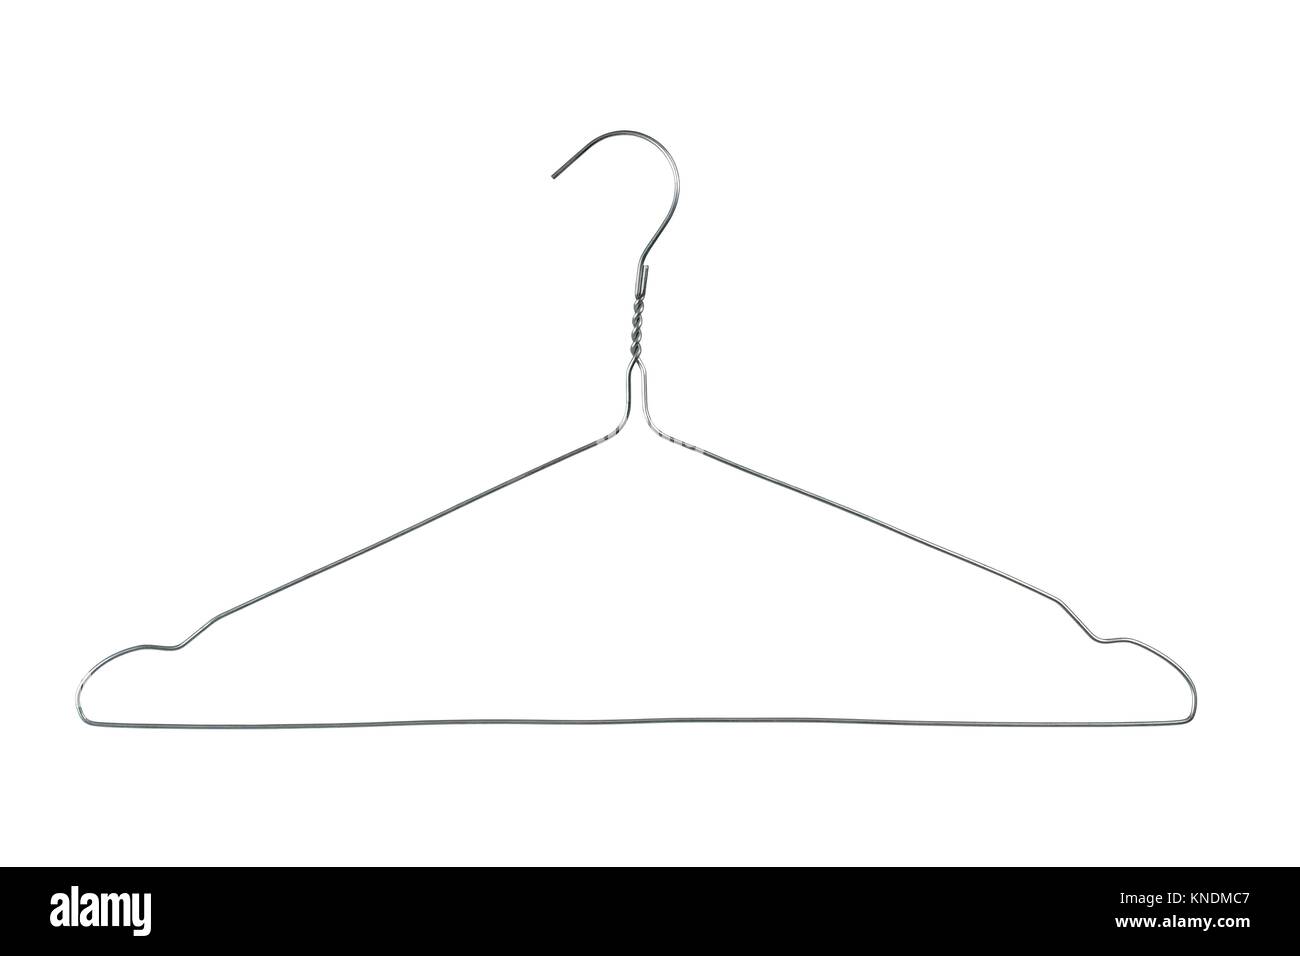 Wire coat hanger isolated on white background Stock Photo